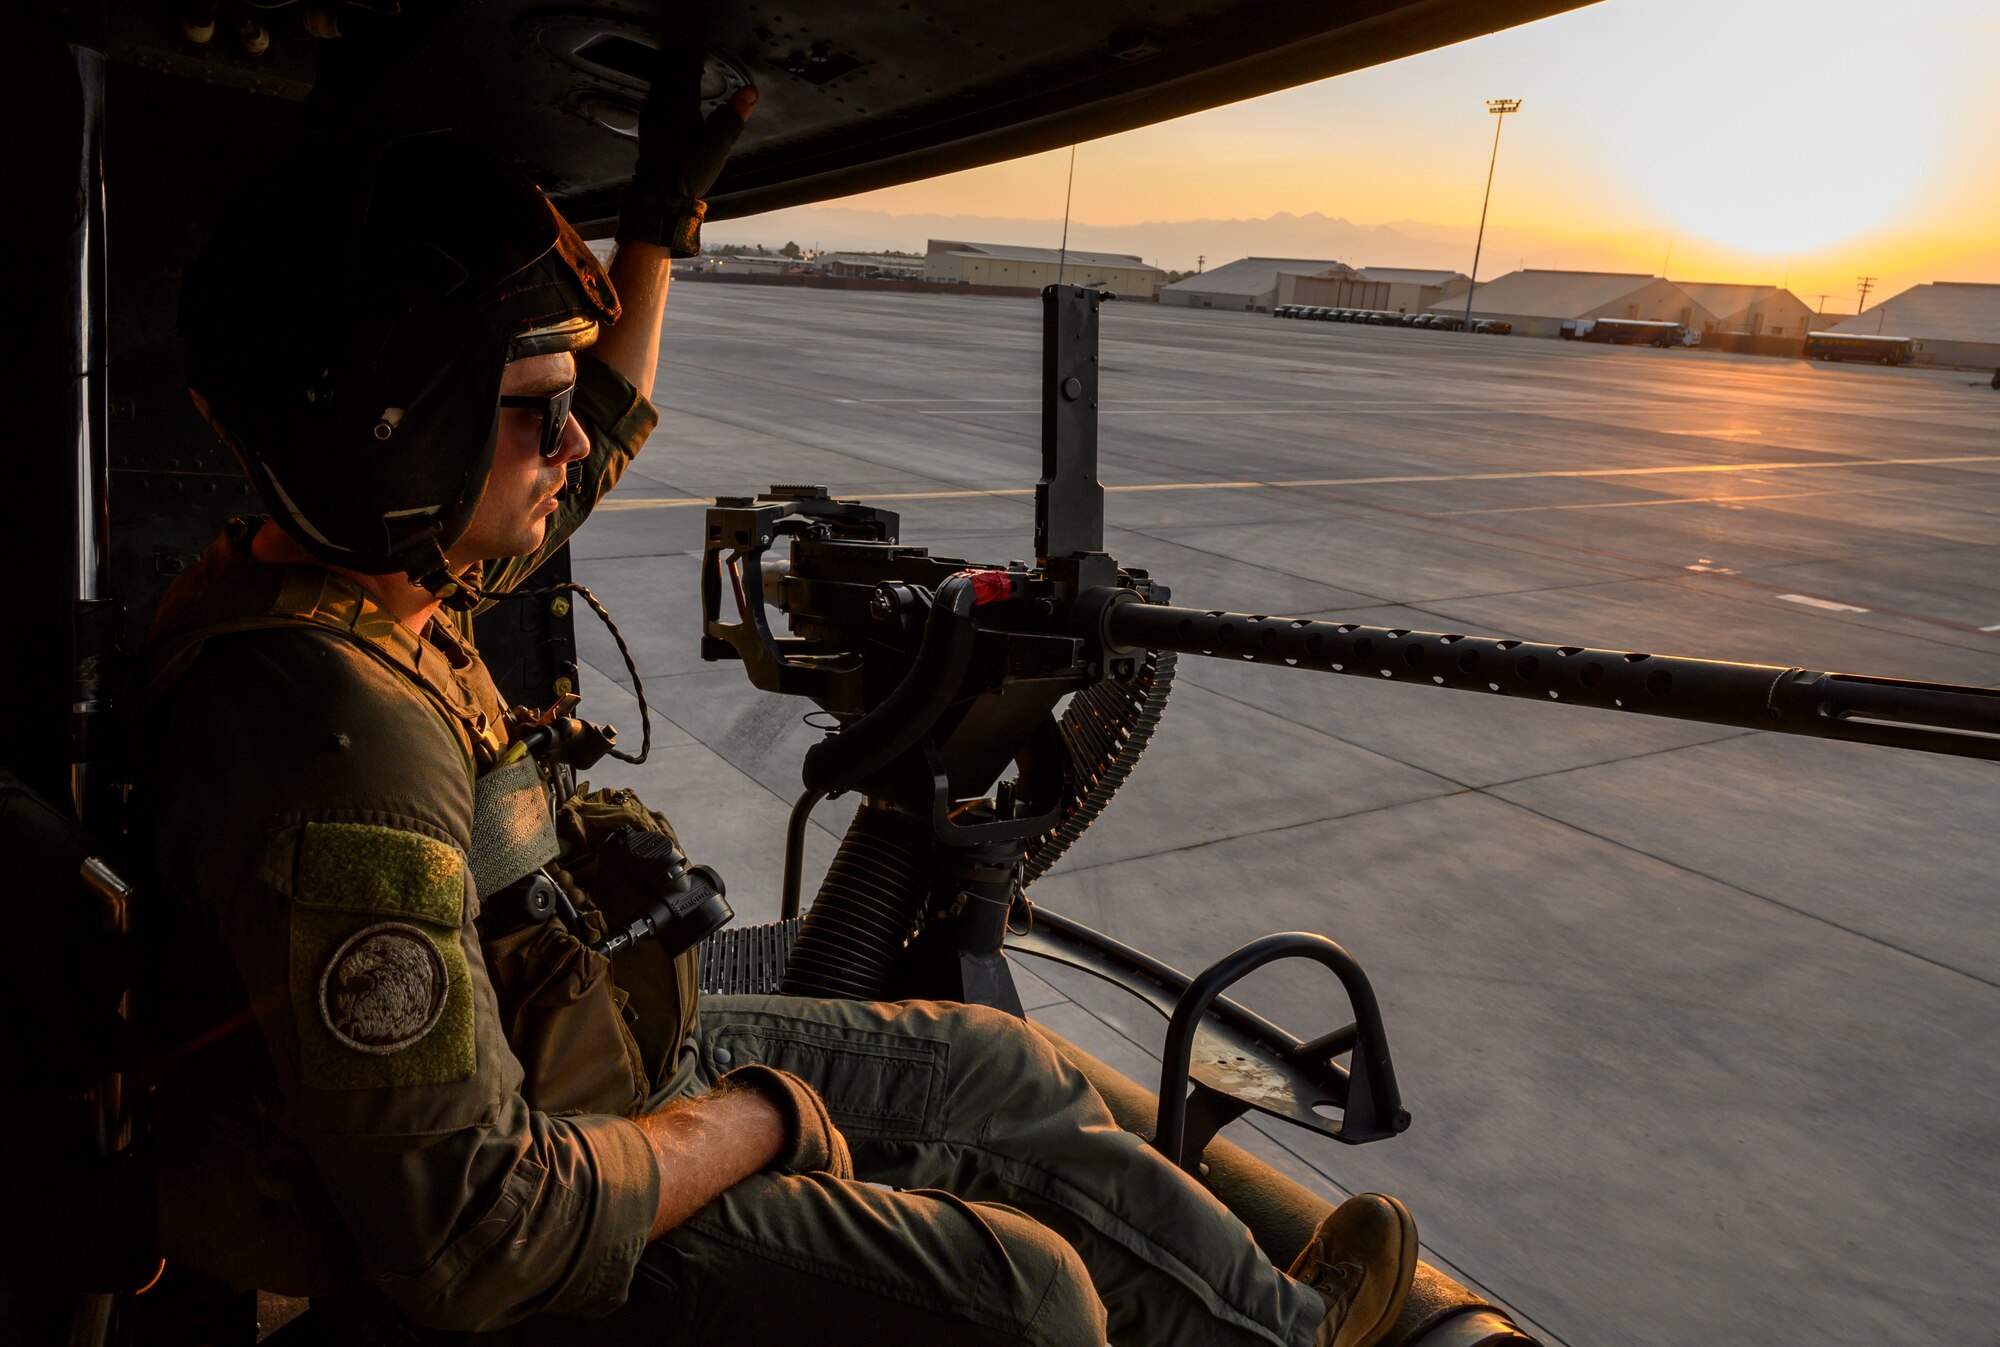 Marine sits in helicopter on flight line.